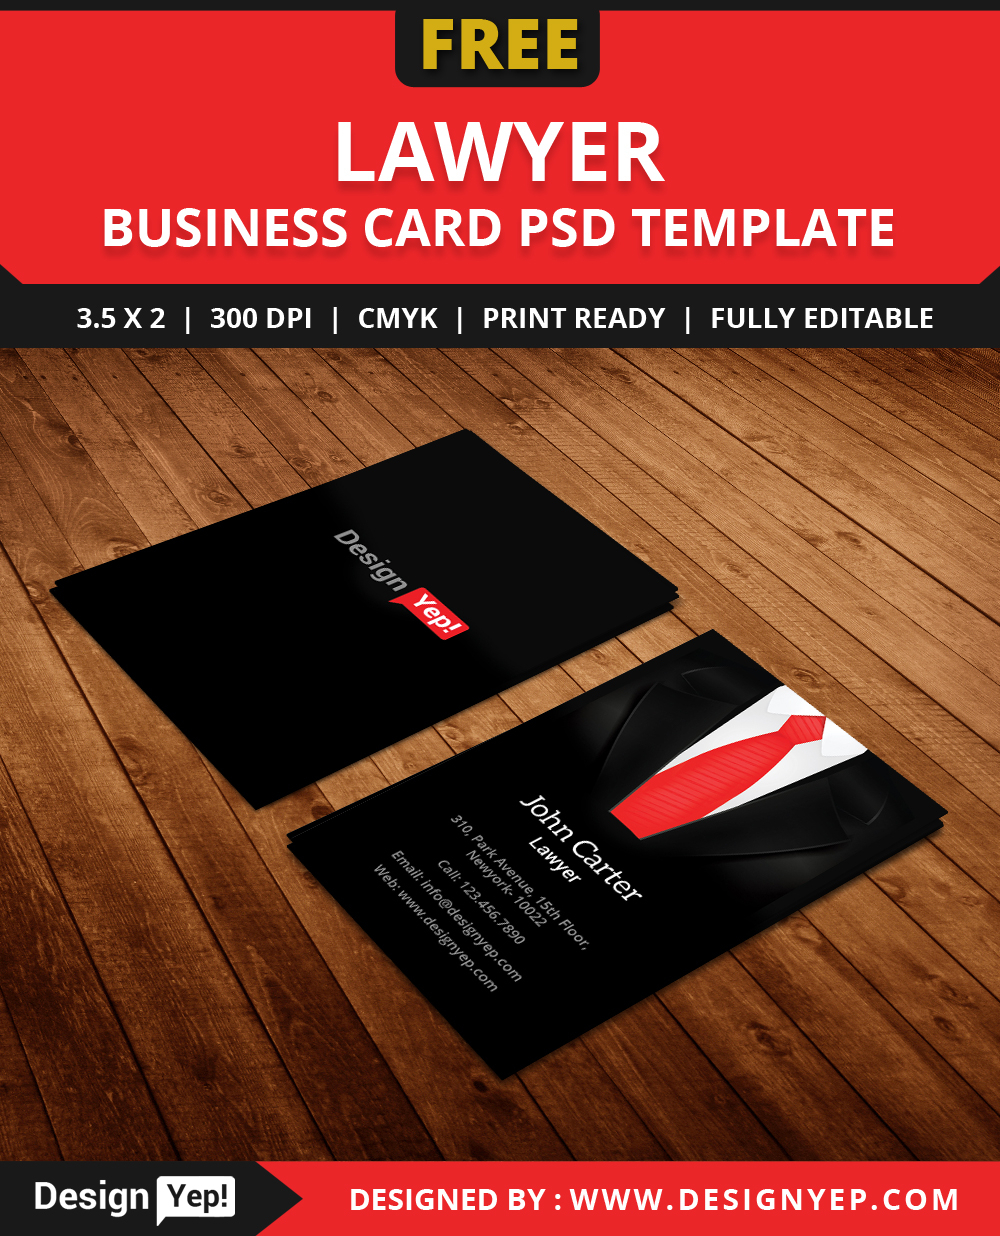 Free Lawyer Business Card Template Psd - Designyep Intended For Lawyer Business Cards Templates